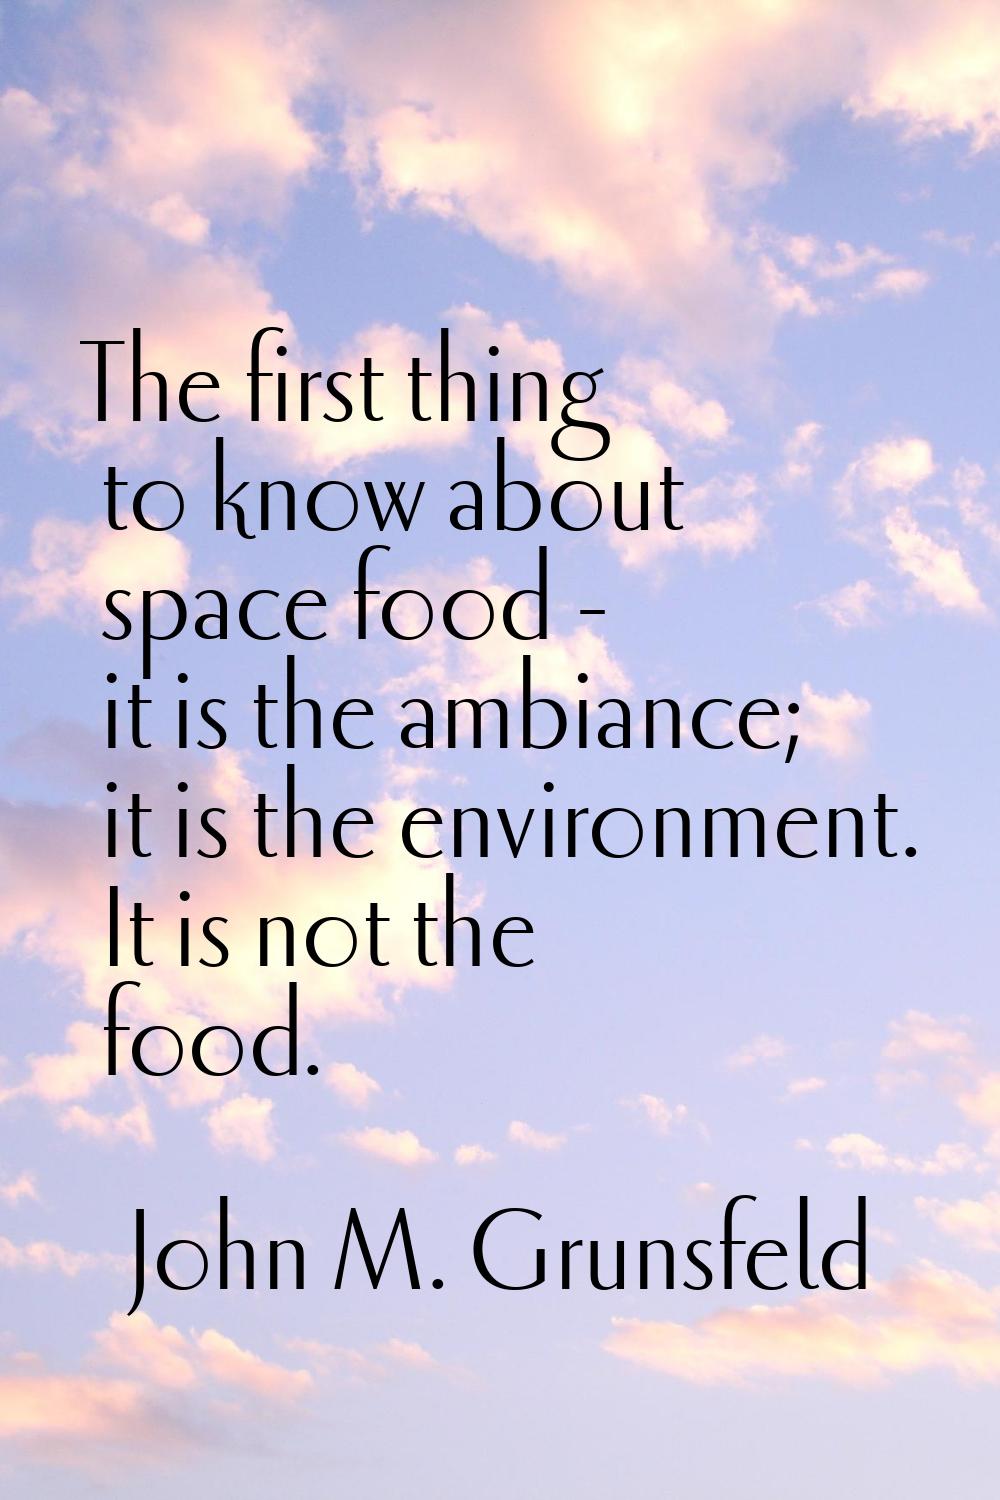 The first thing to know about space food - it is the ambiance; it is the environment. It is not the